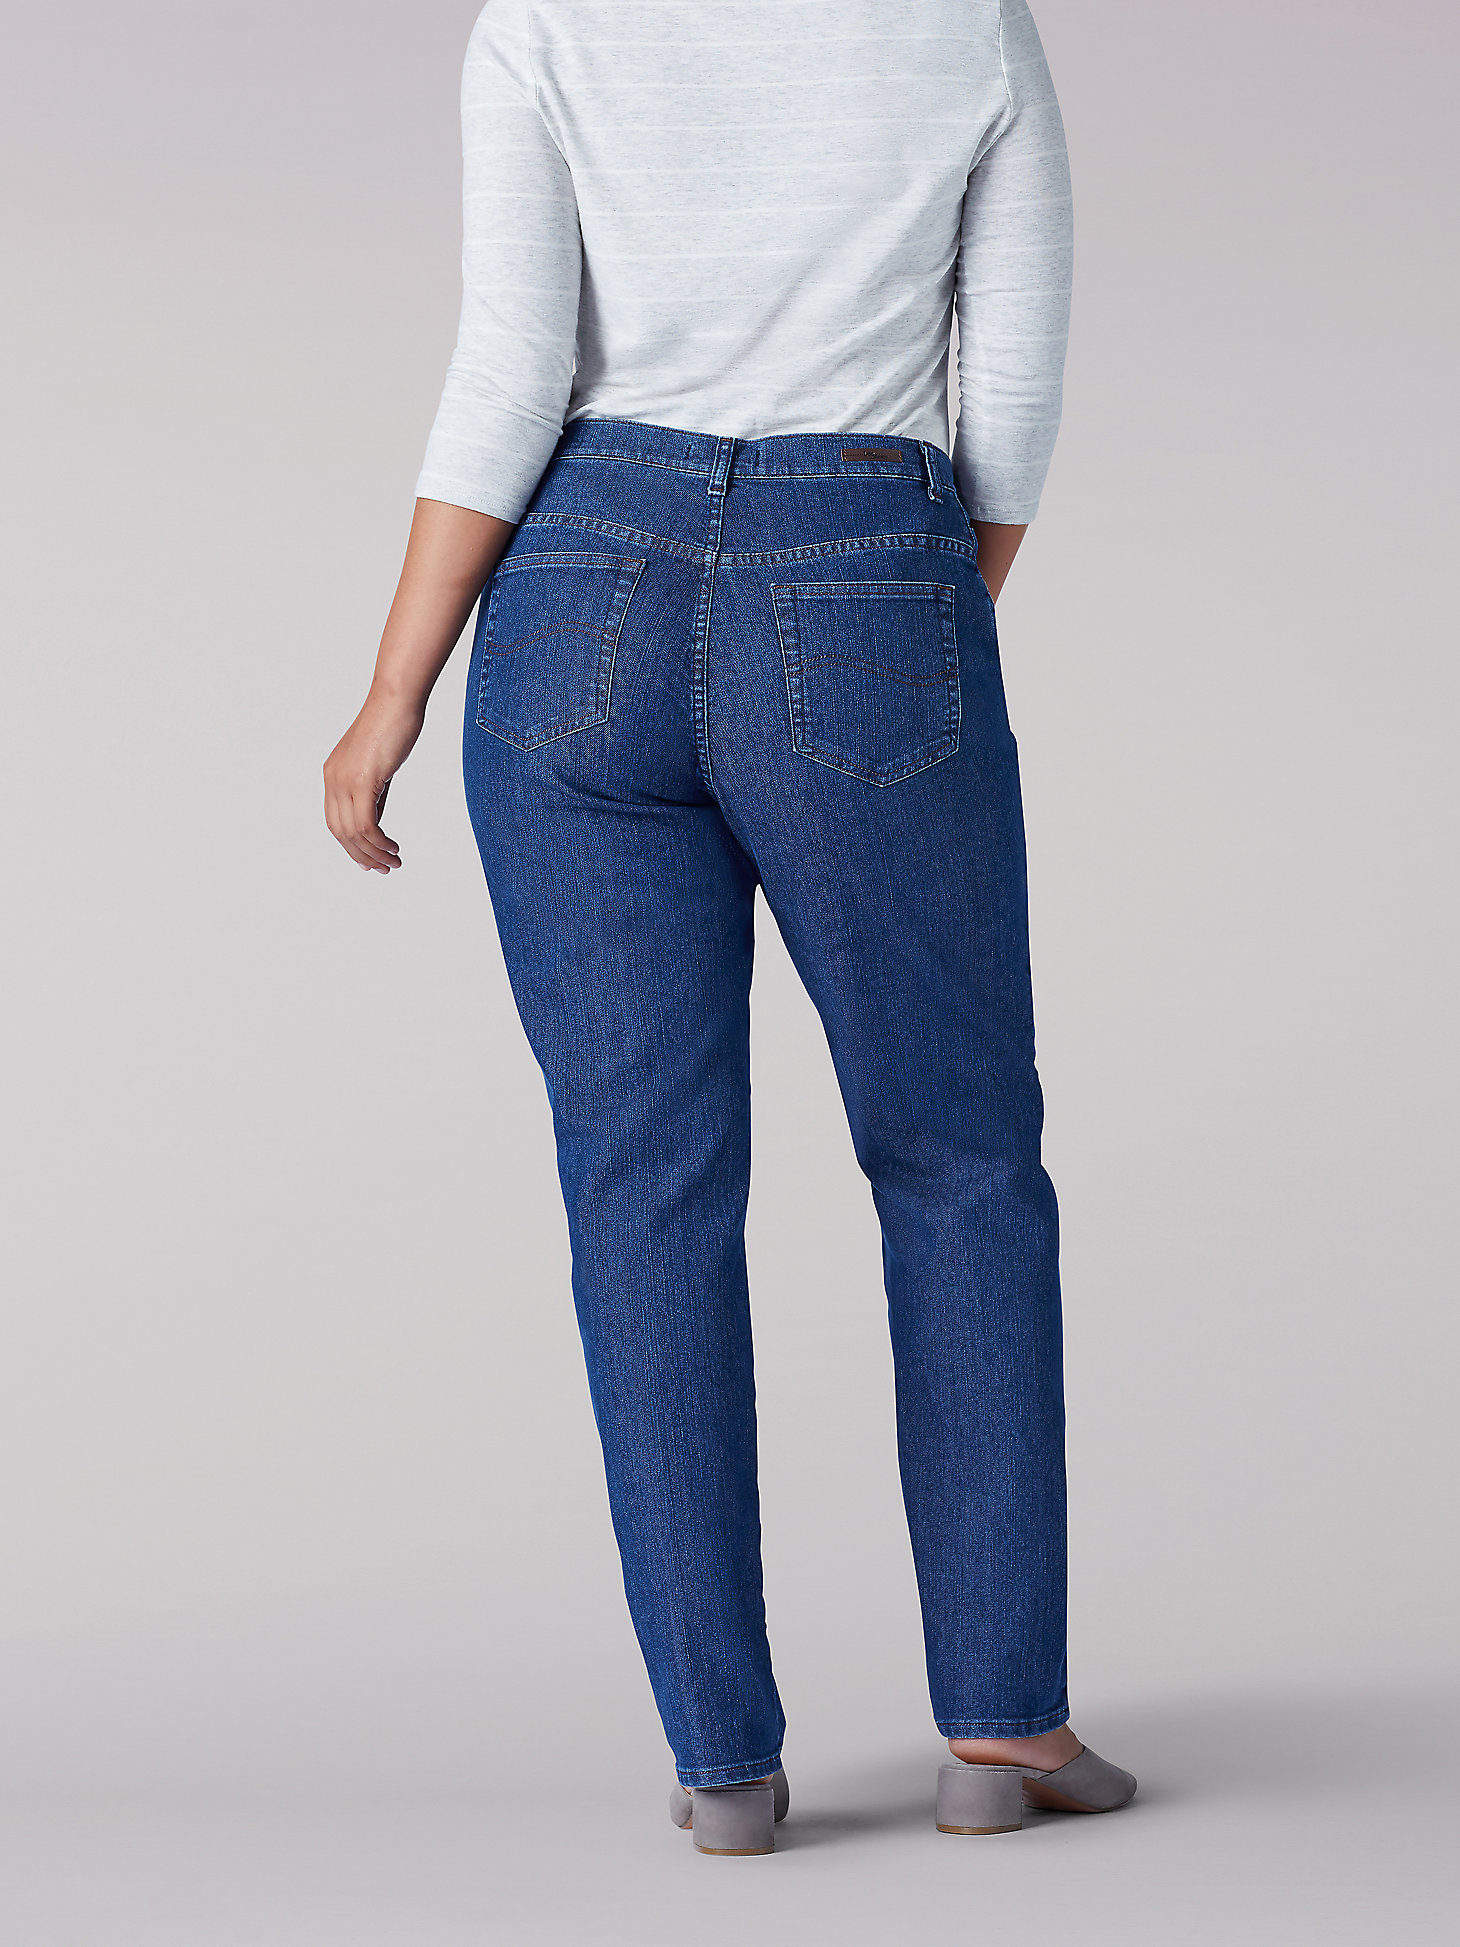 Women’s Original Relaxed Fit Straight Leg Jeans (Plus) in Premium Rinse alternative view 1